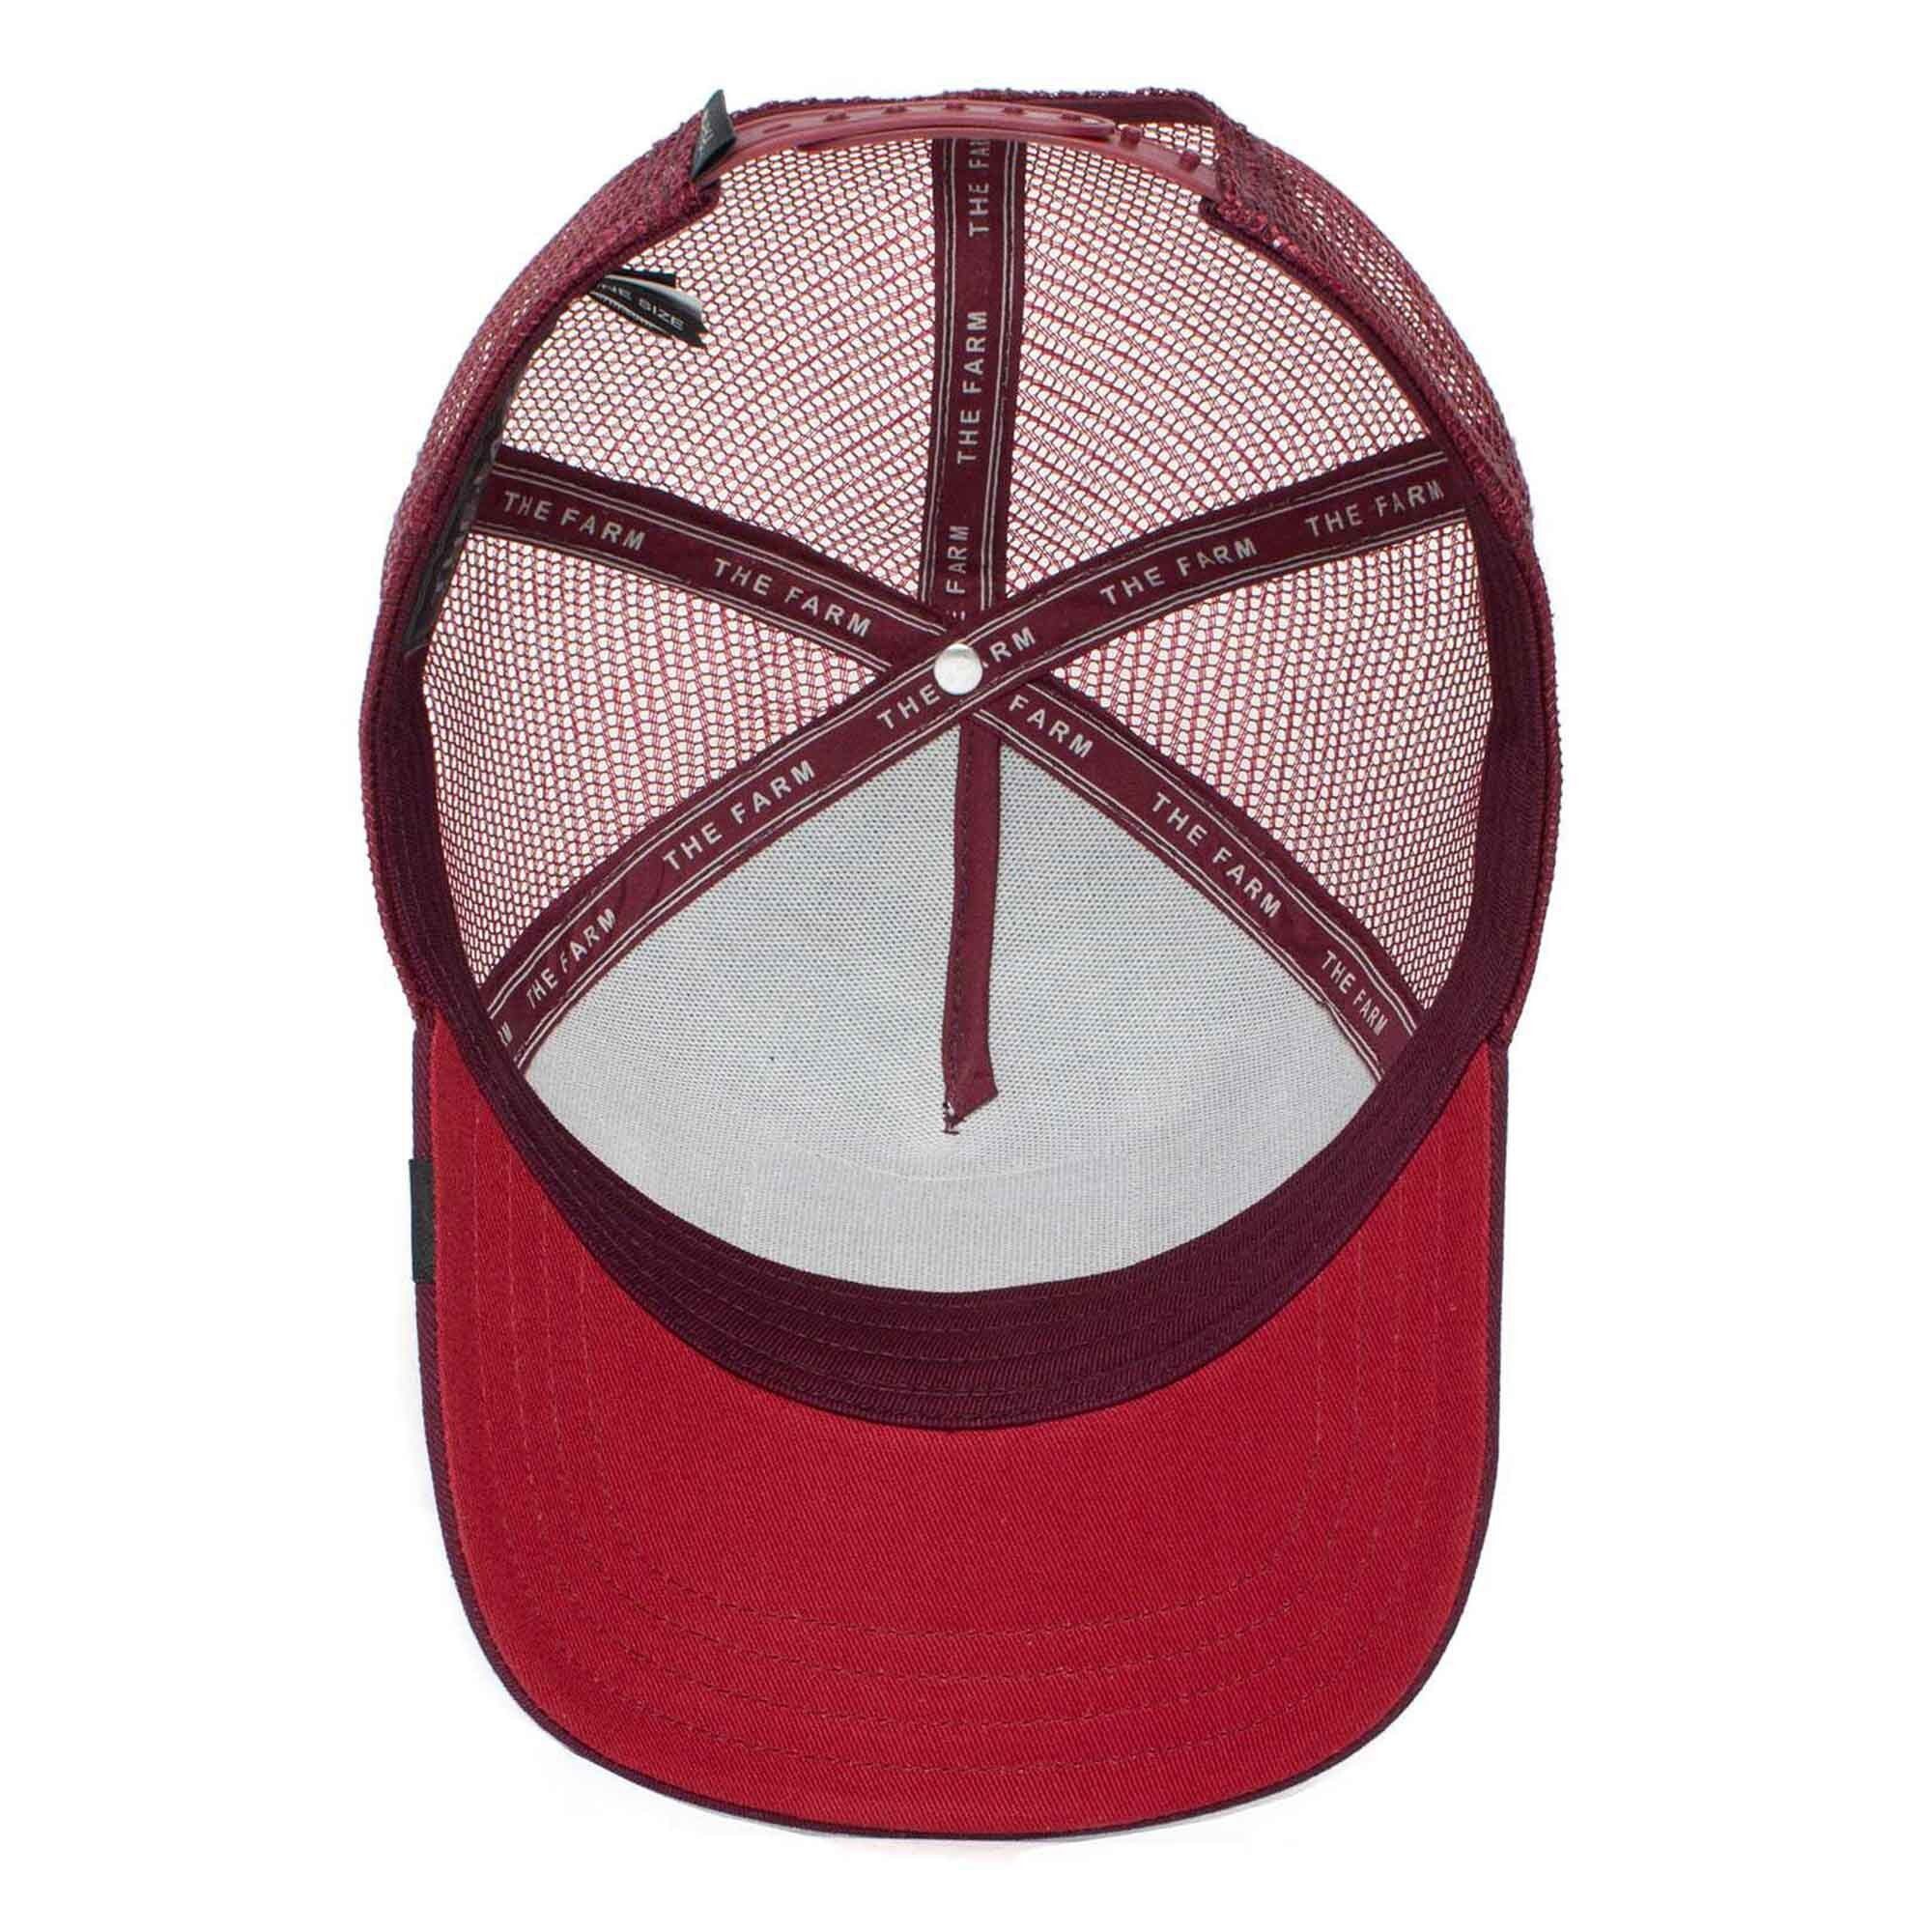 Cap Kappe, Unisex The Panther Frontpatch, Baseball Bros. GOORIN - maroon One Size Cap Trucker